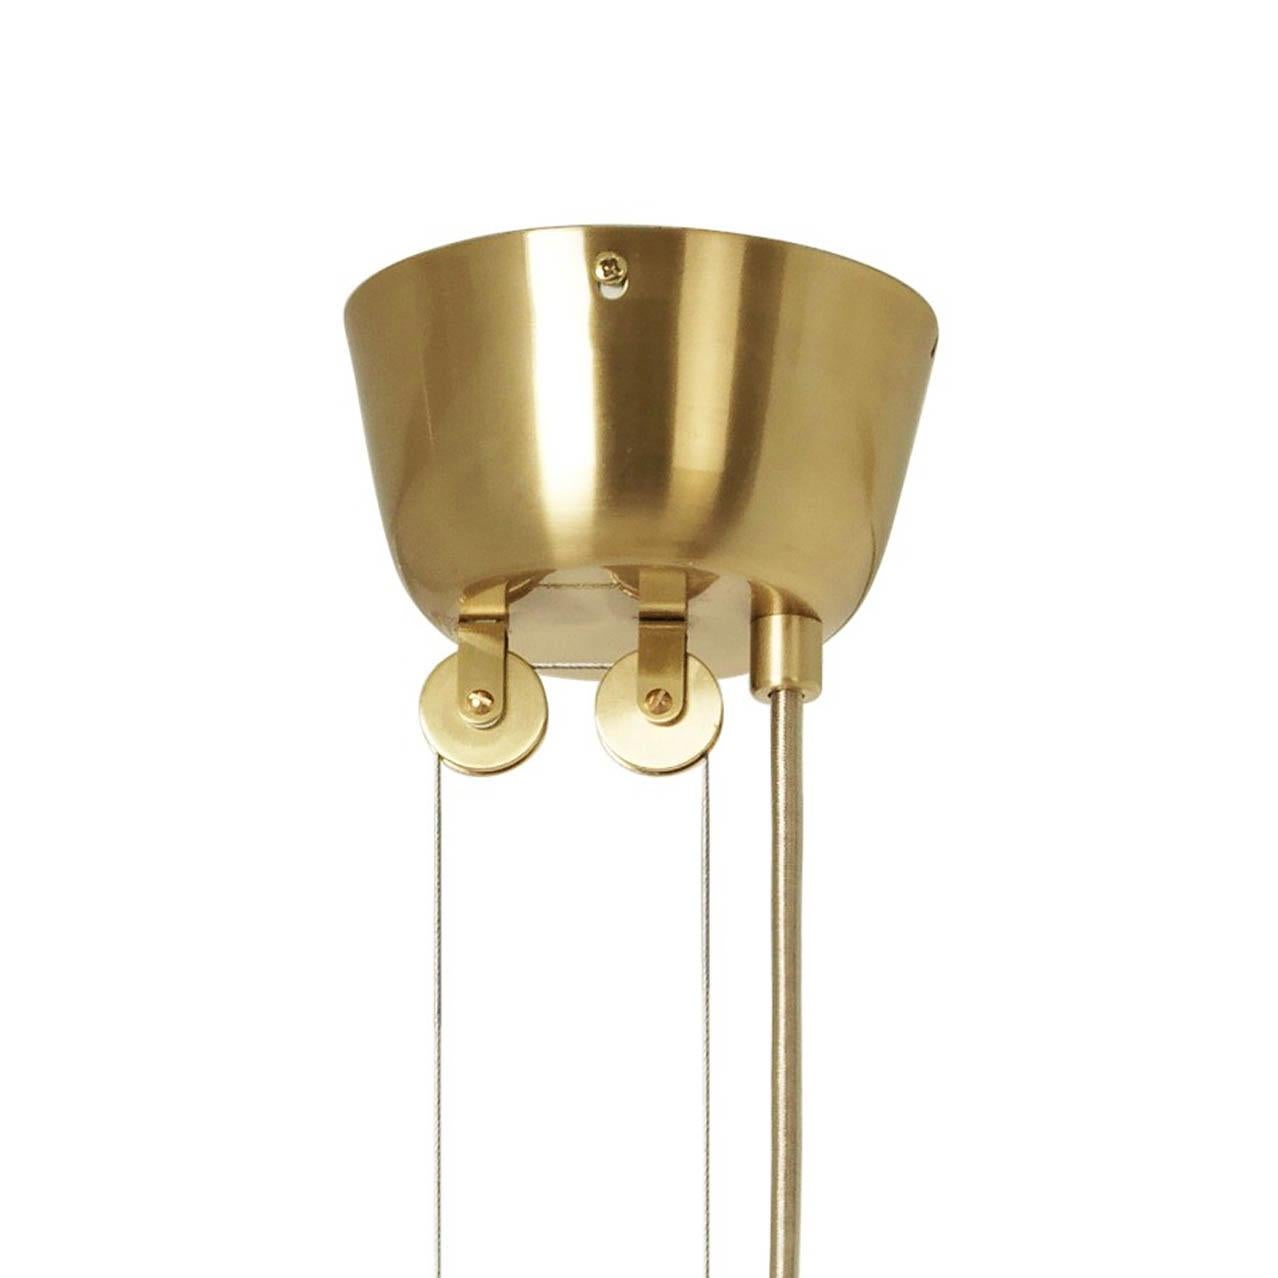 Finnish Paavo Tynell 'A1965' Counterweight Pendant Lamp in Brass For Sale